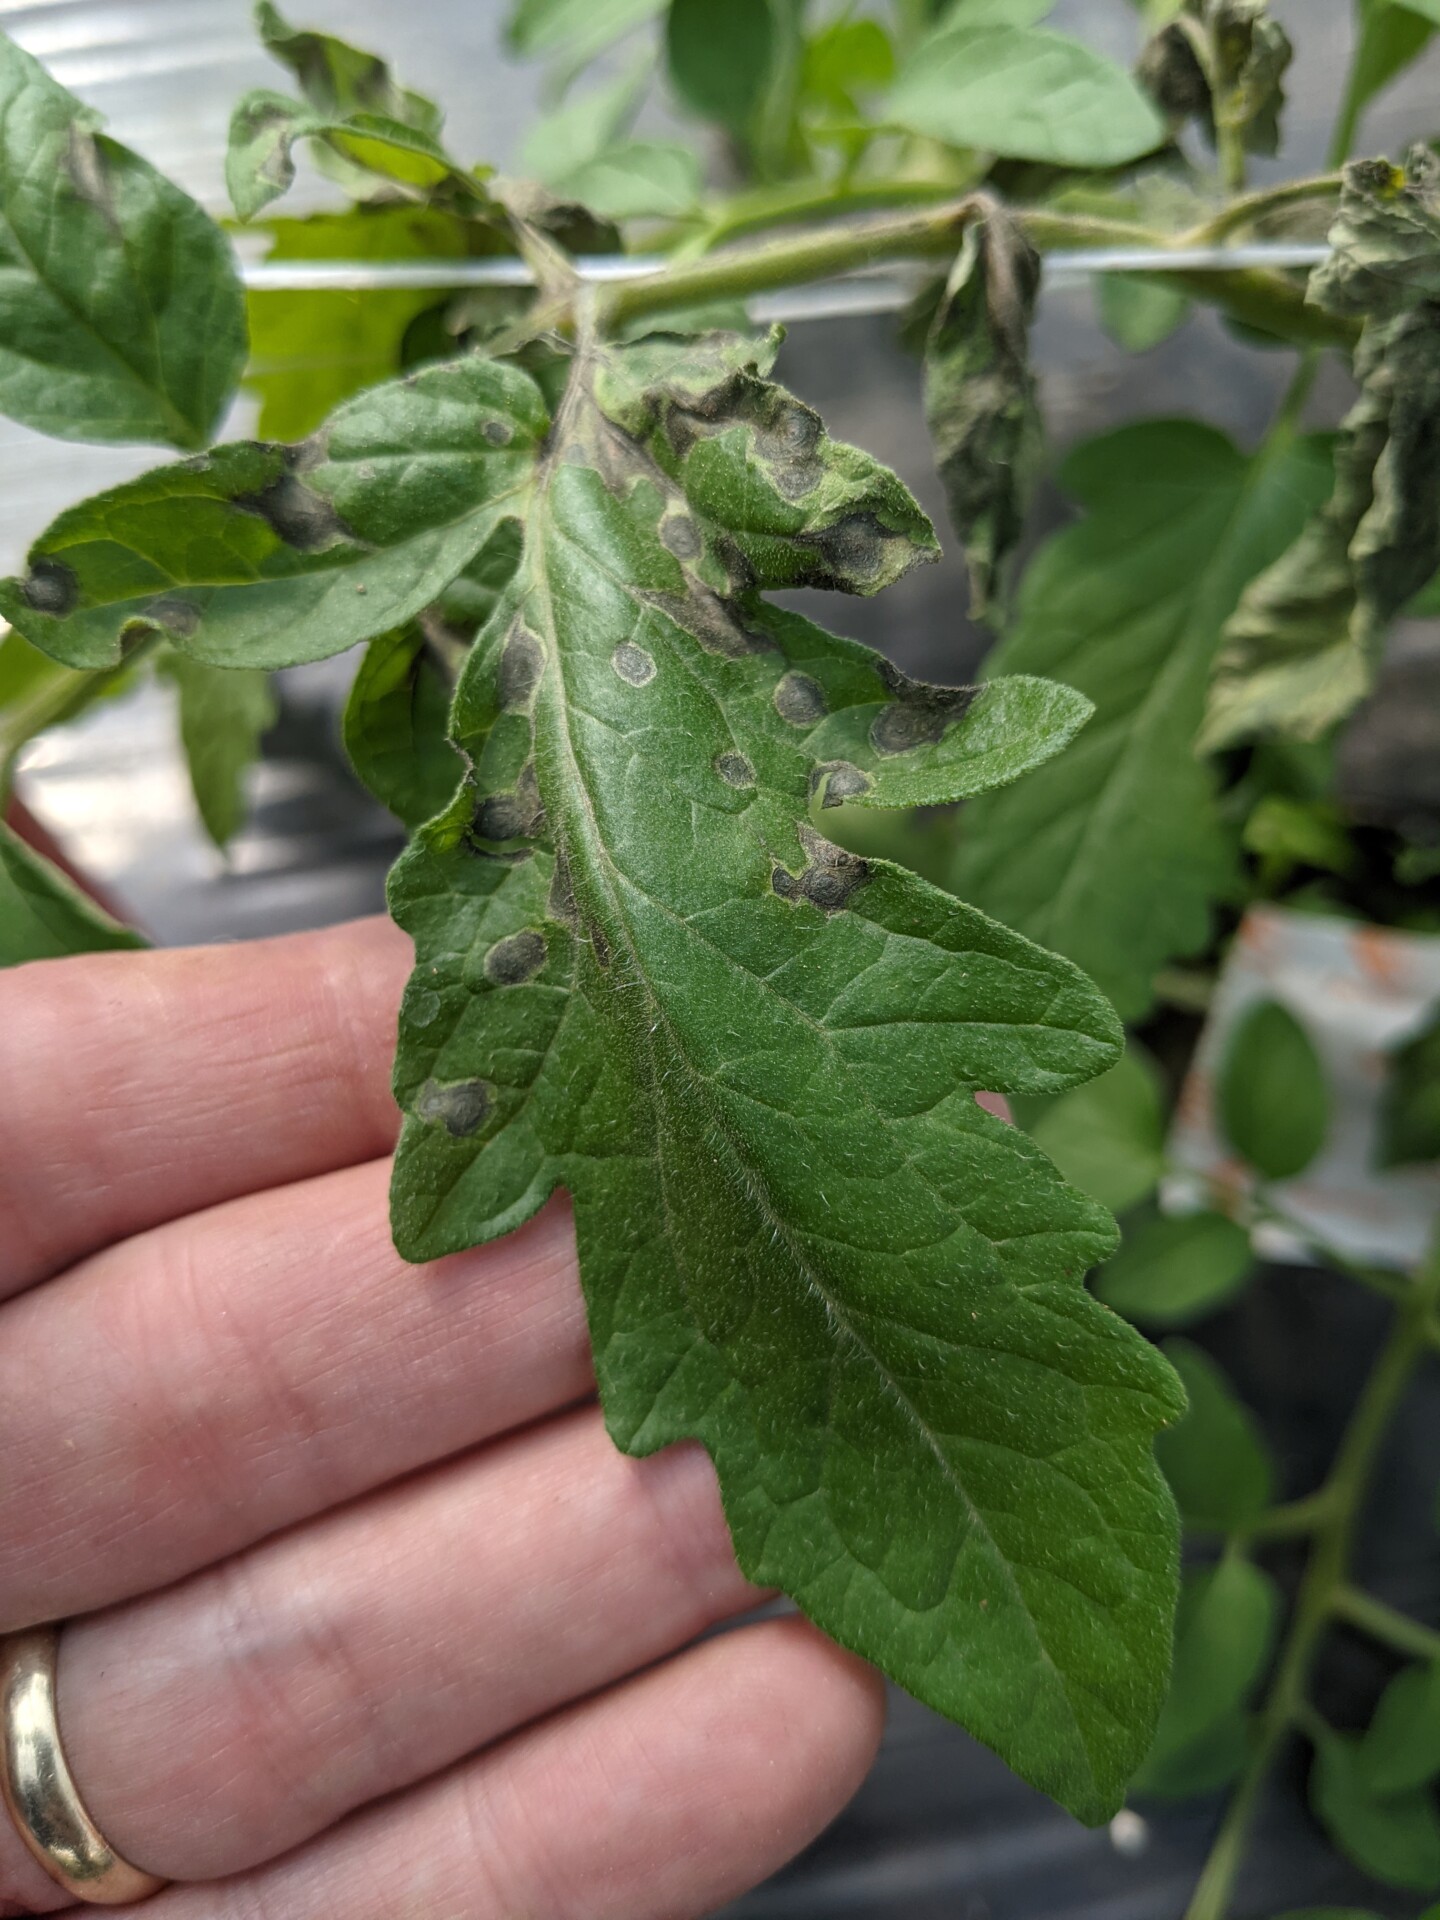 Tomato spotted wilt virus includes a necrotic ring spot lesion.